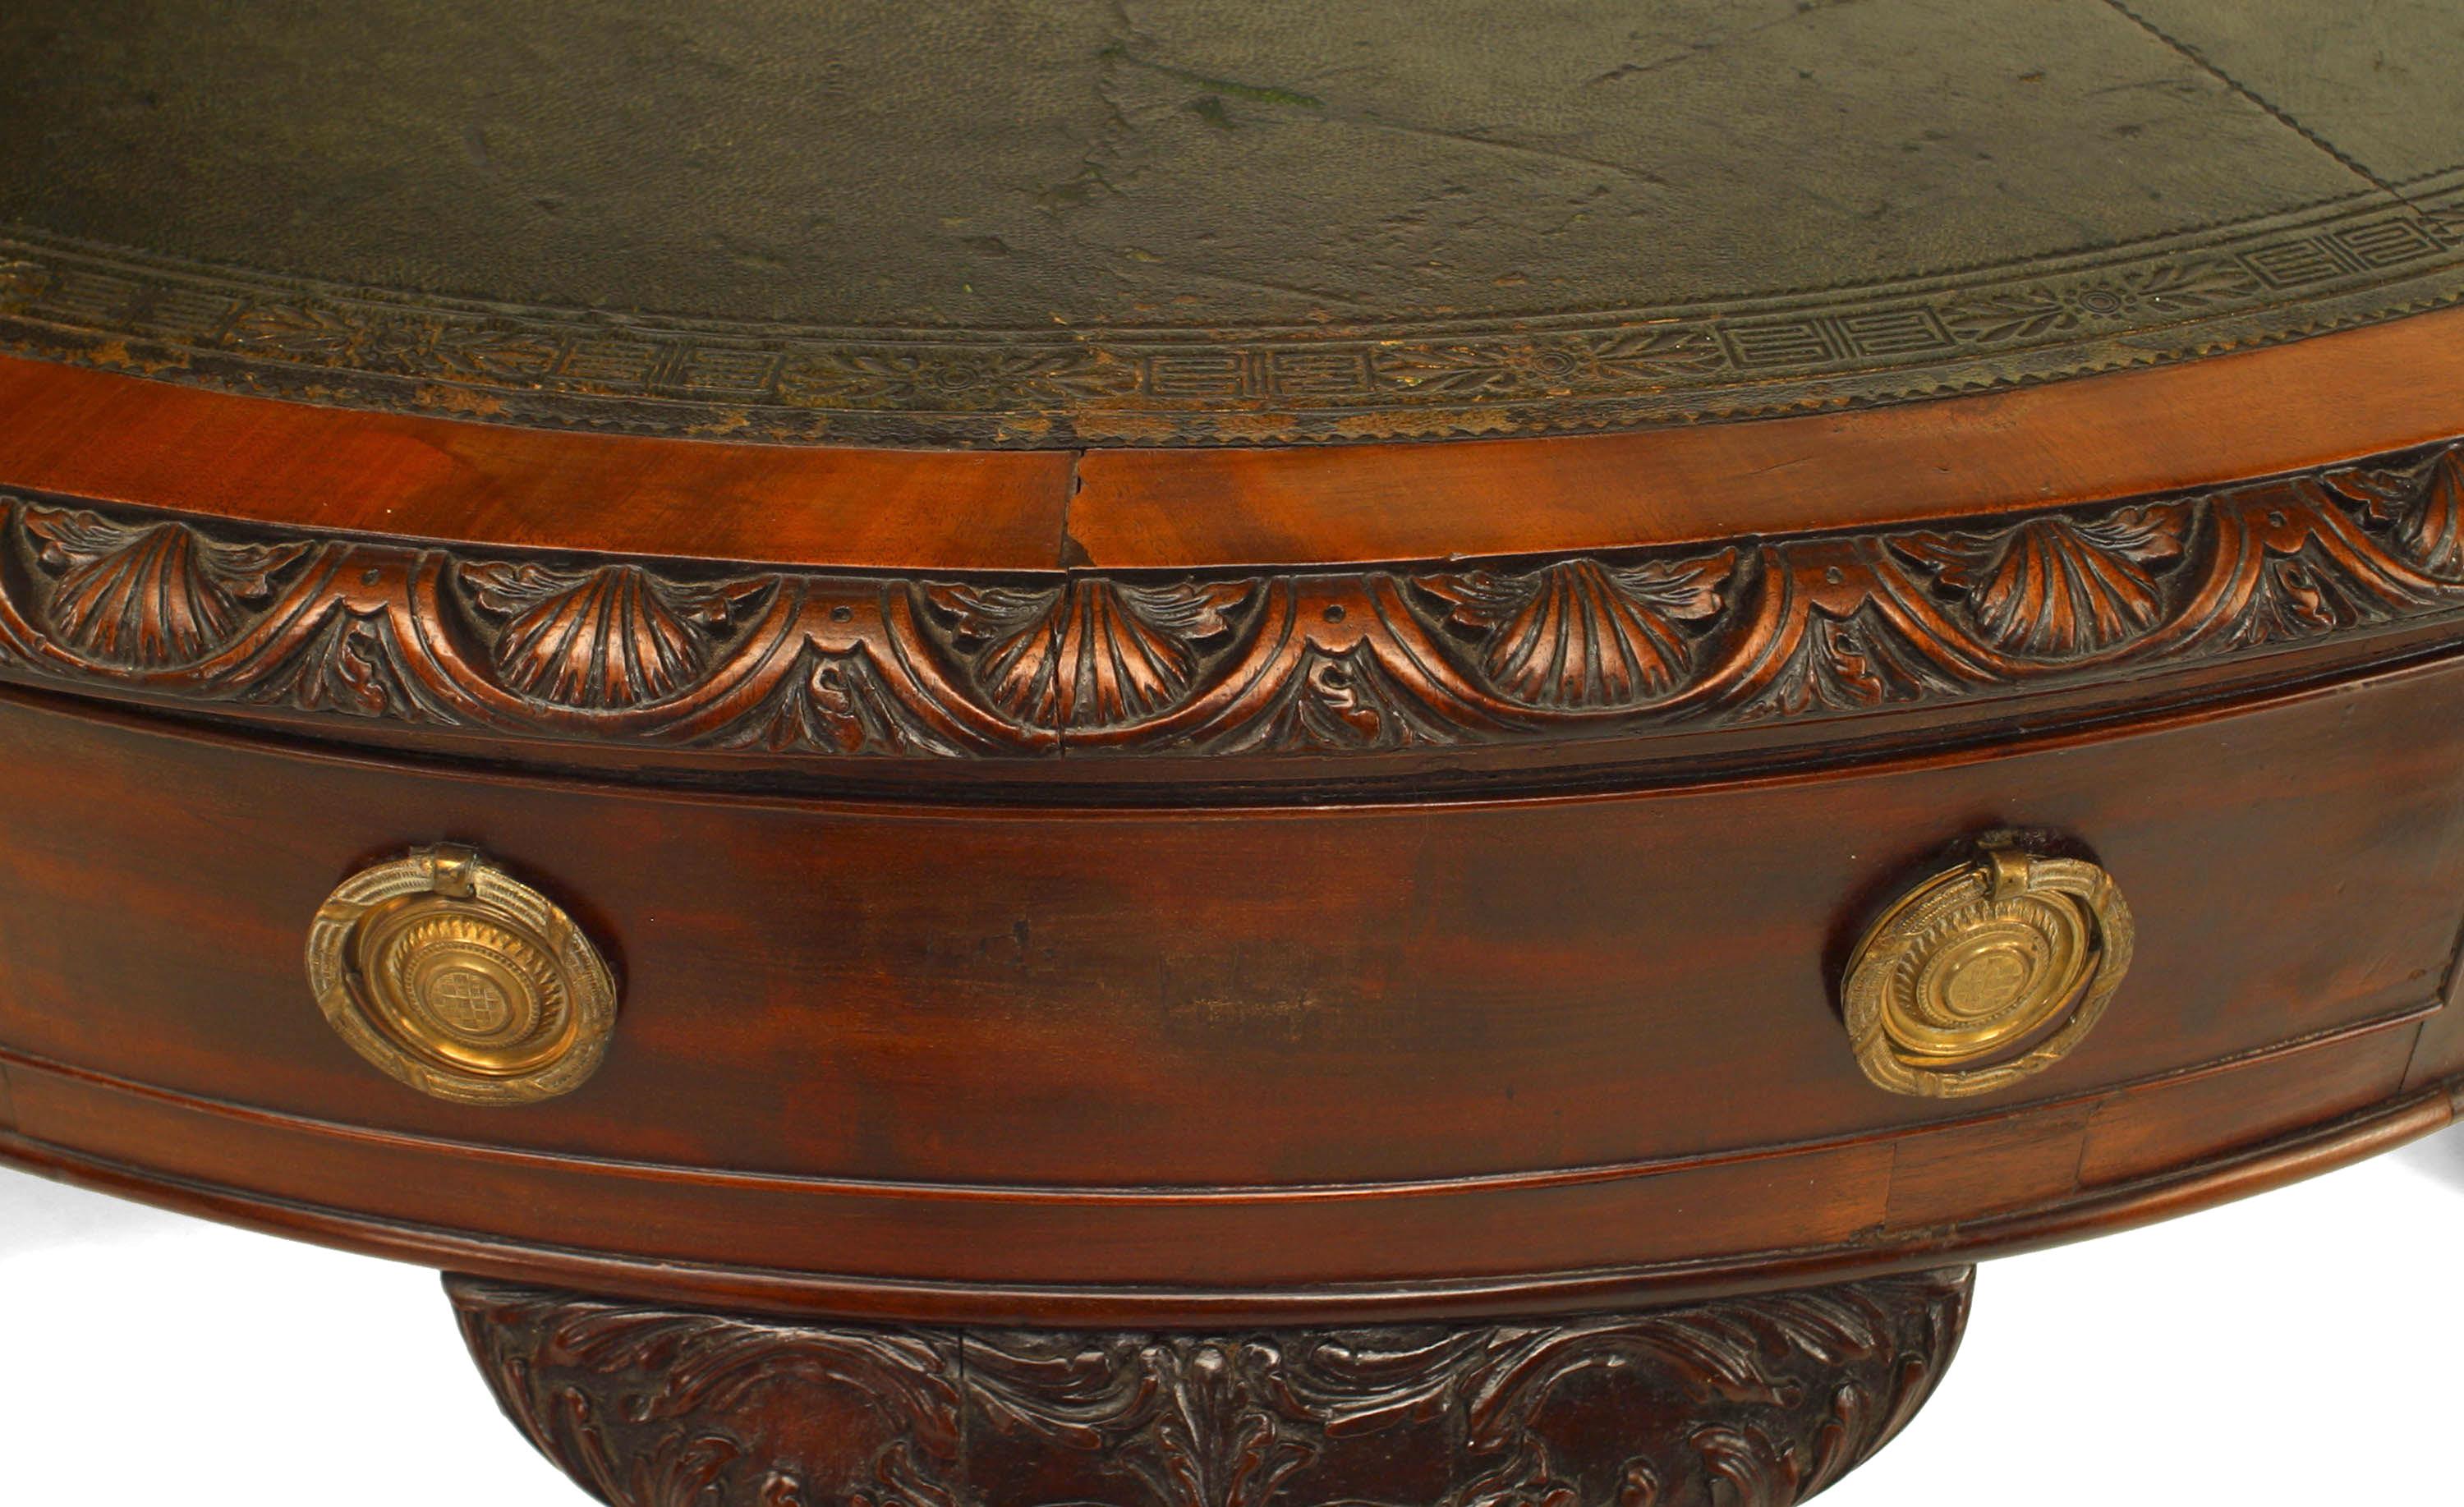 English Chippendale style (18/19th Century) mahogany landlord style drum design center table with 4 drawers and round green leather top.